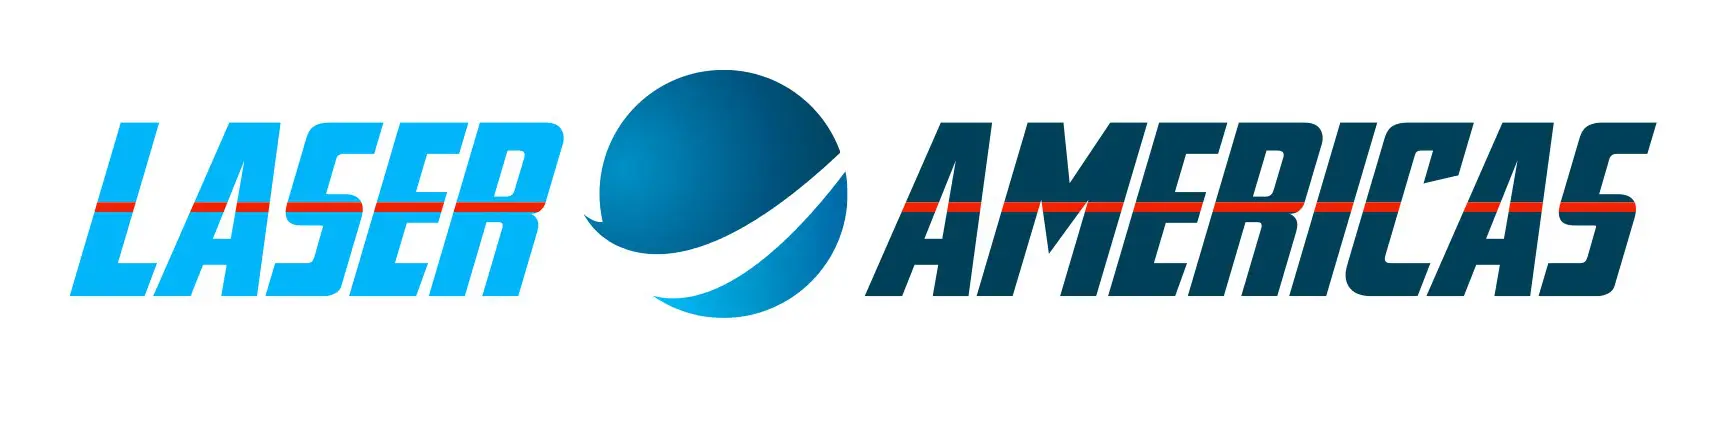 A blue and white logo of amt